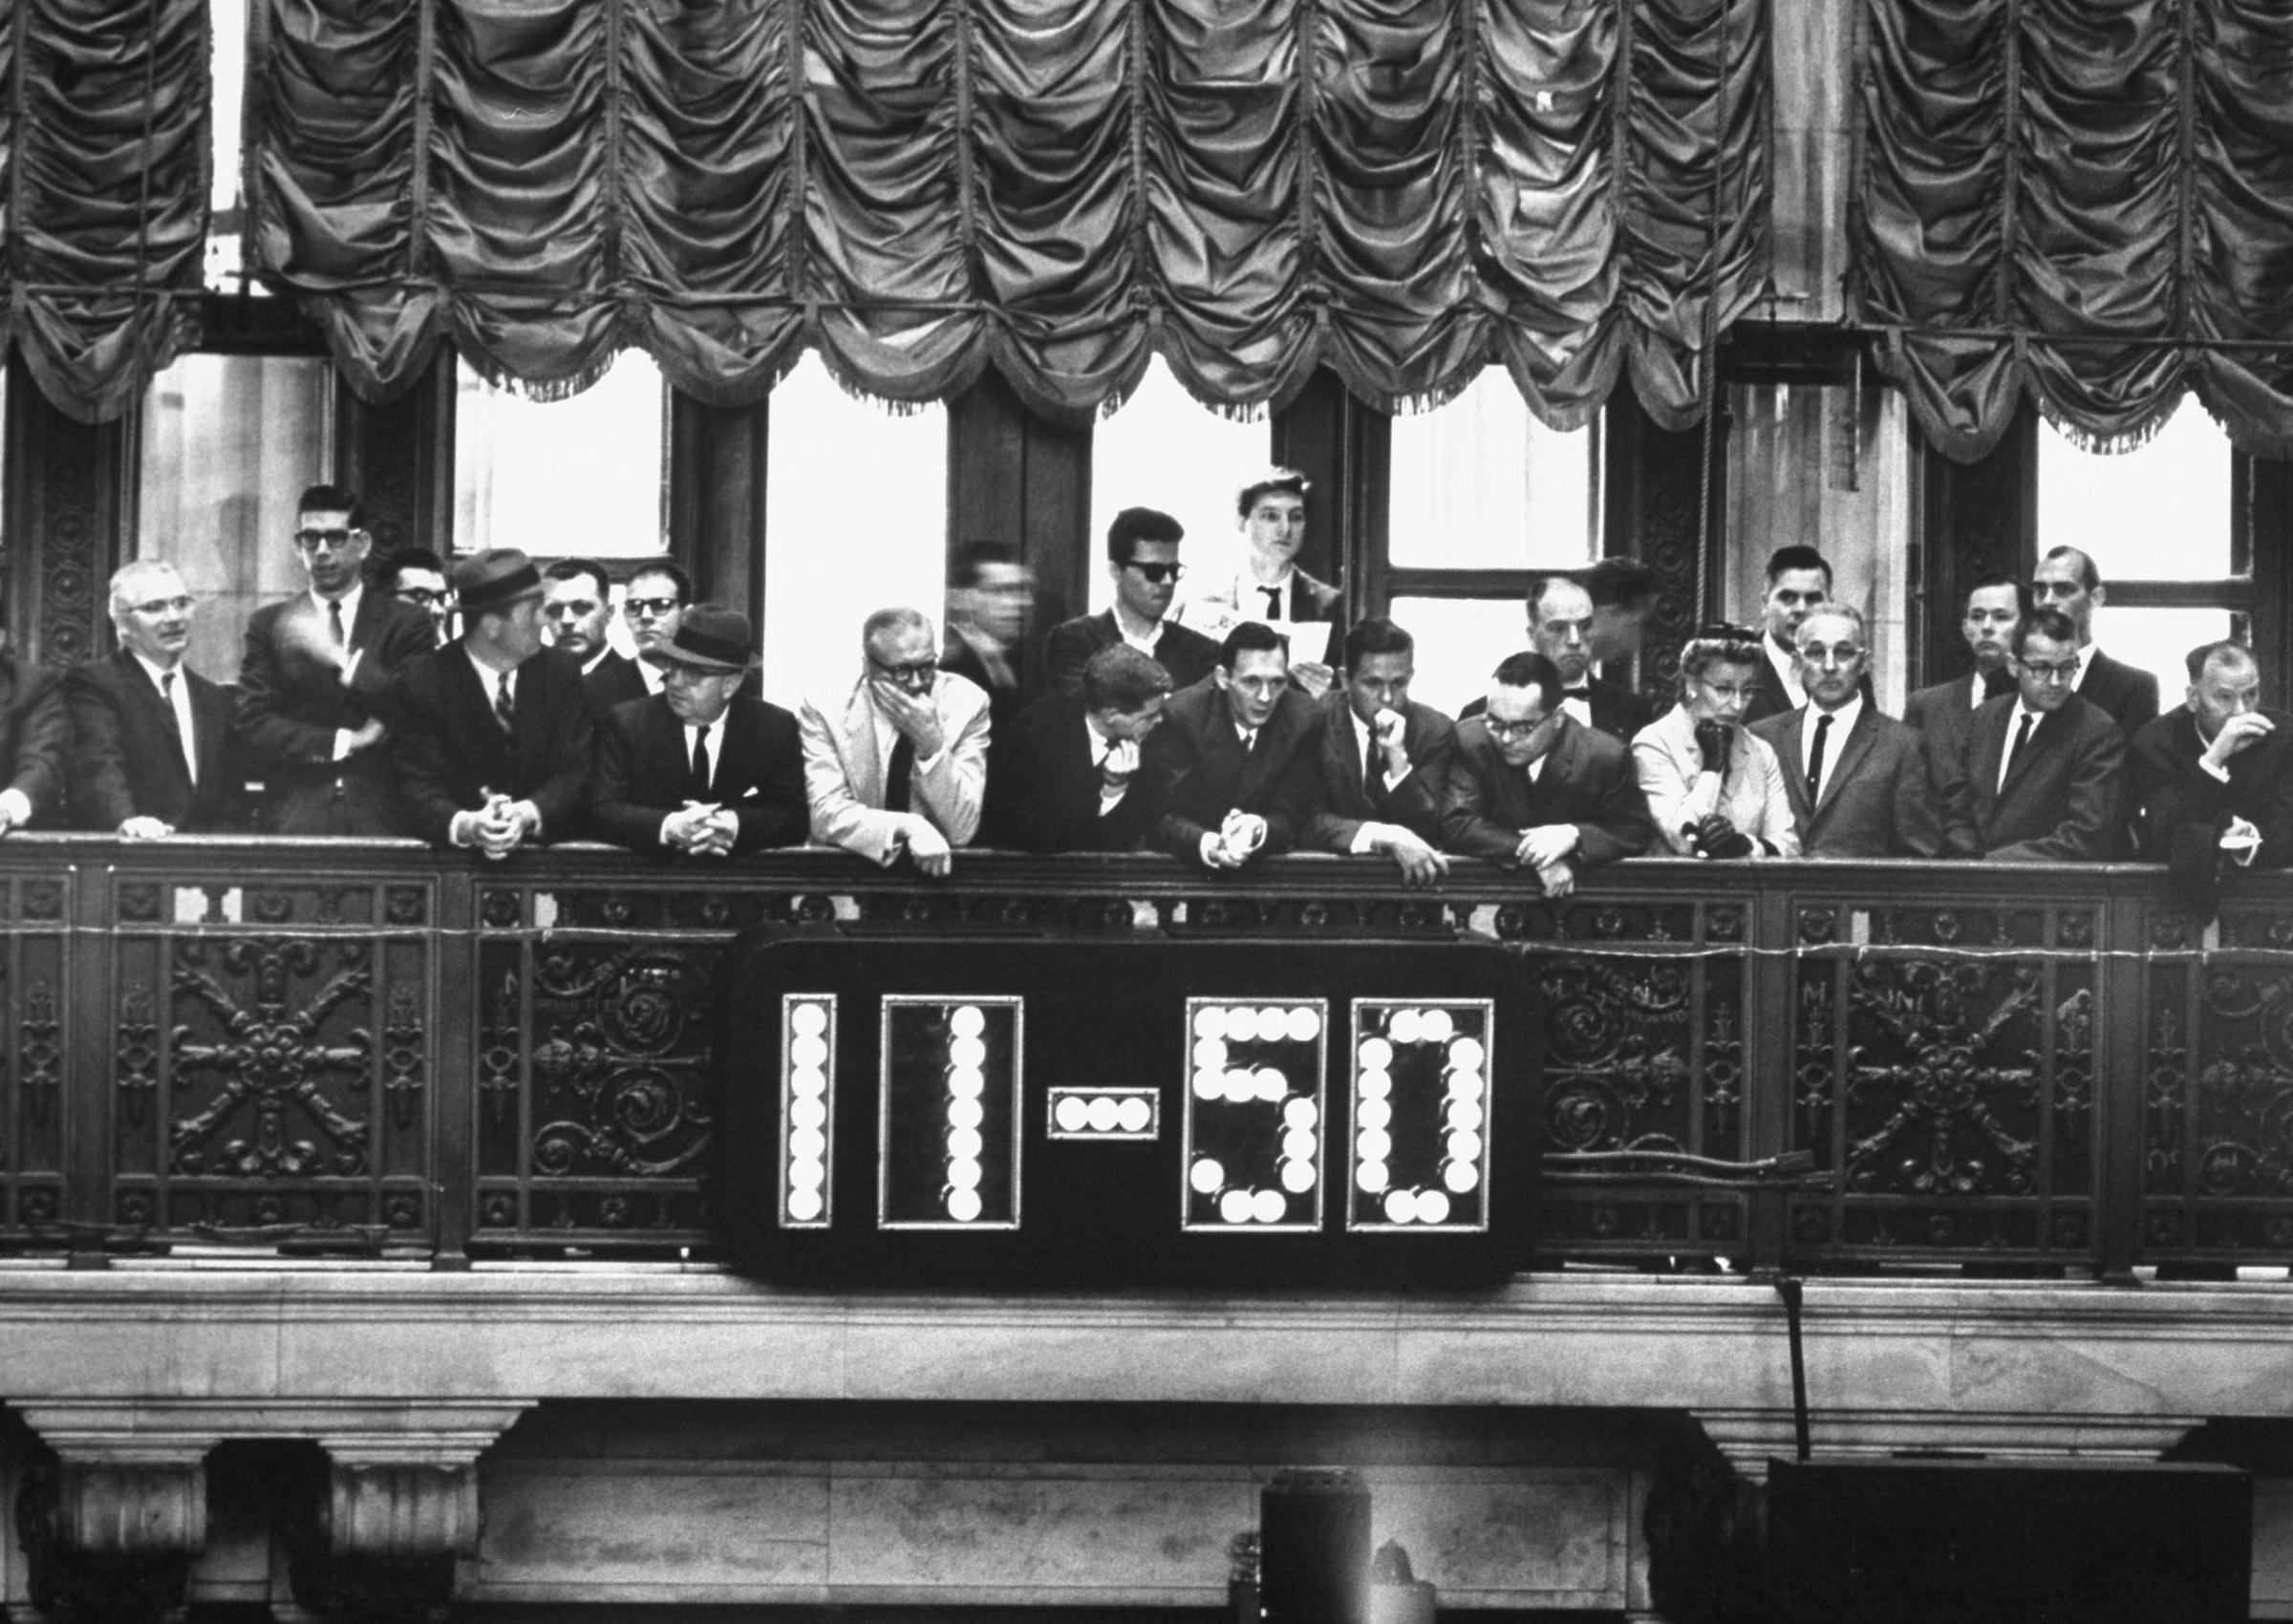 Not originally published in LIFE. The NYSE during the 1962 "flash crash."